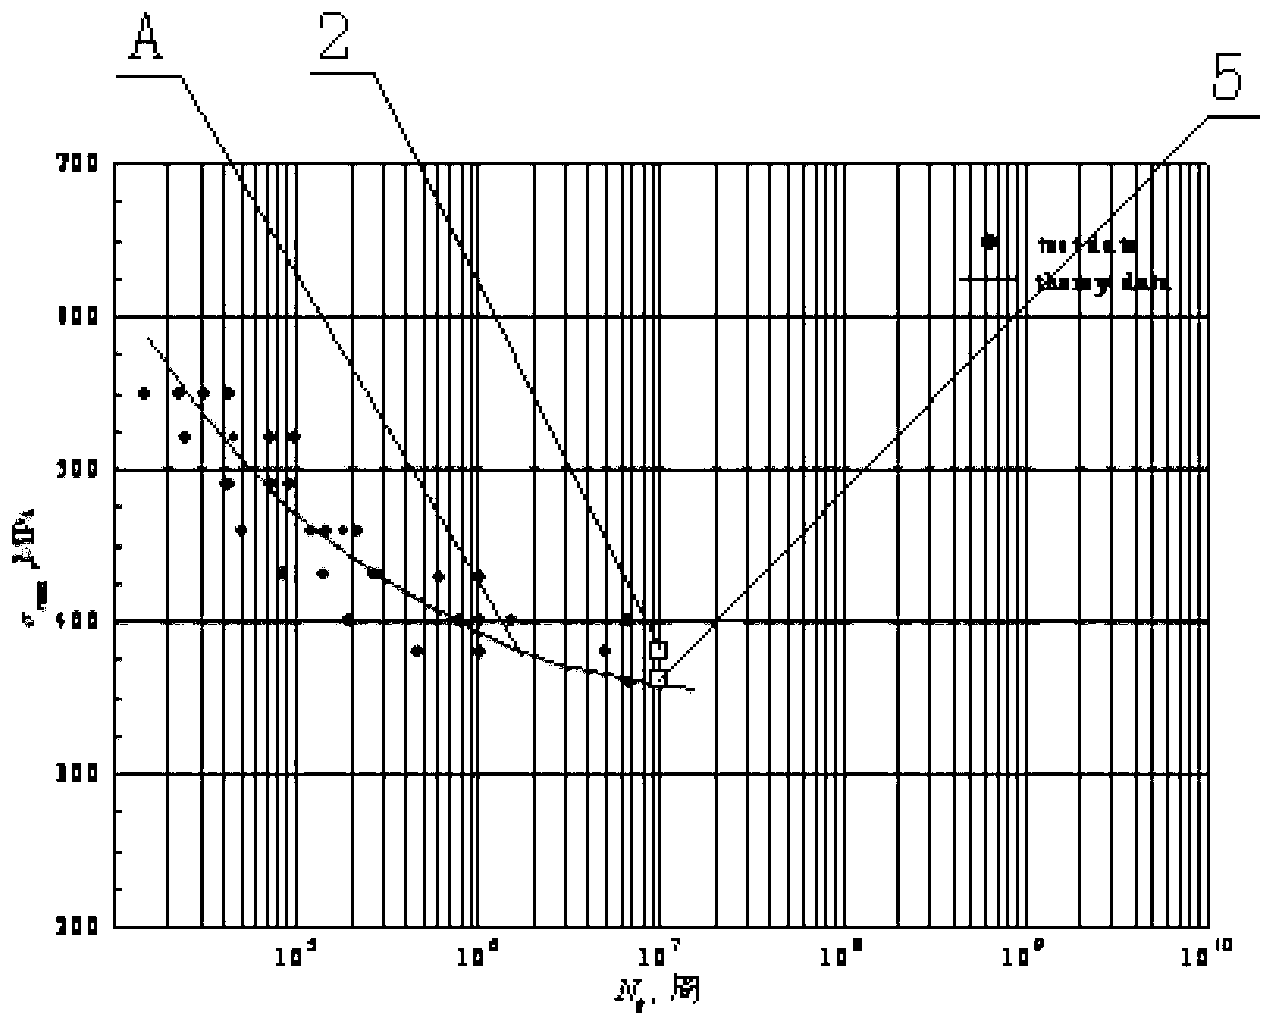 Method for processing material fatigue life test data